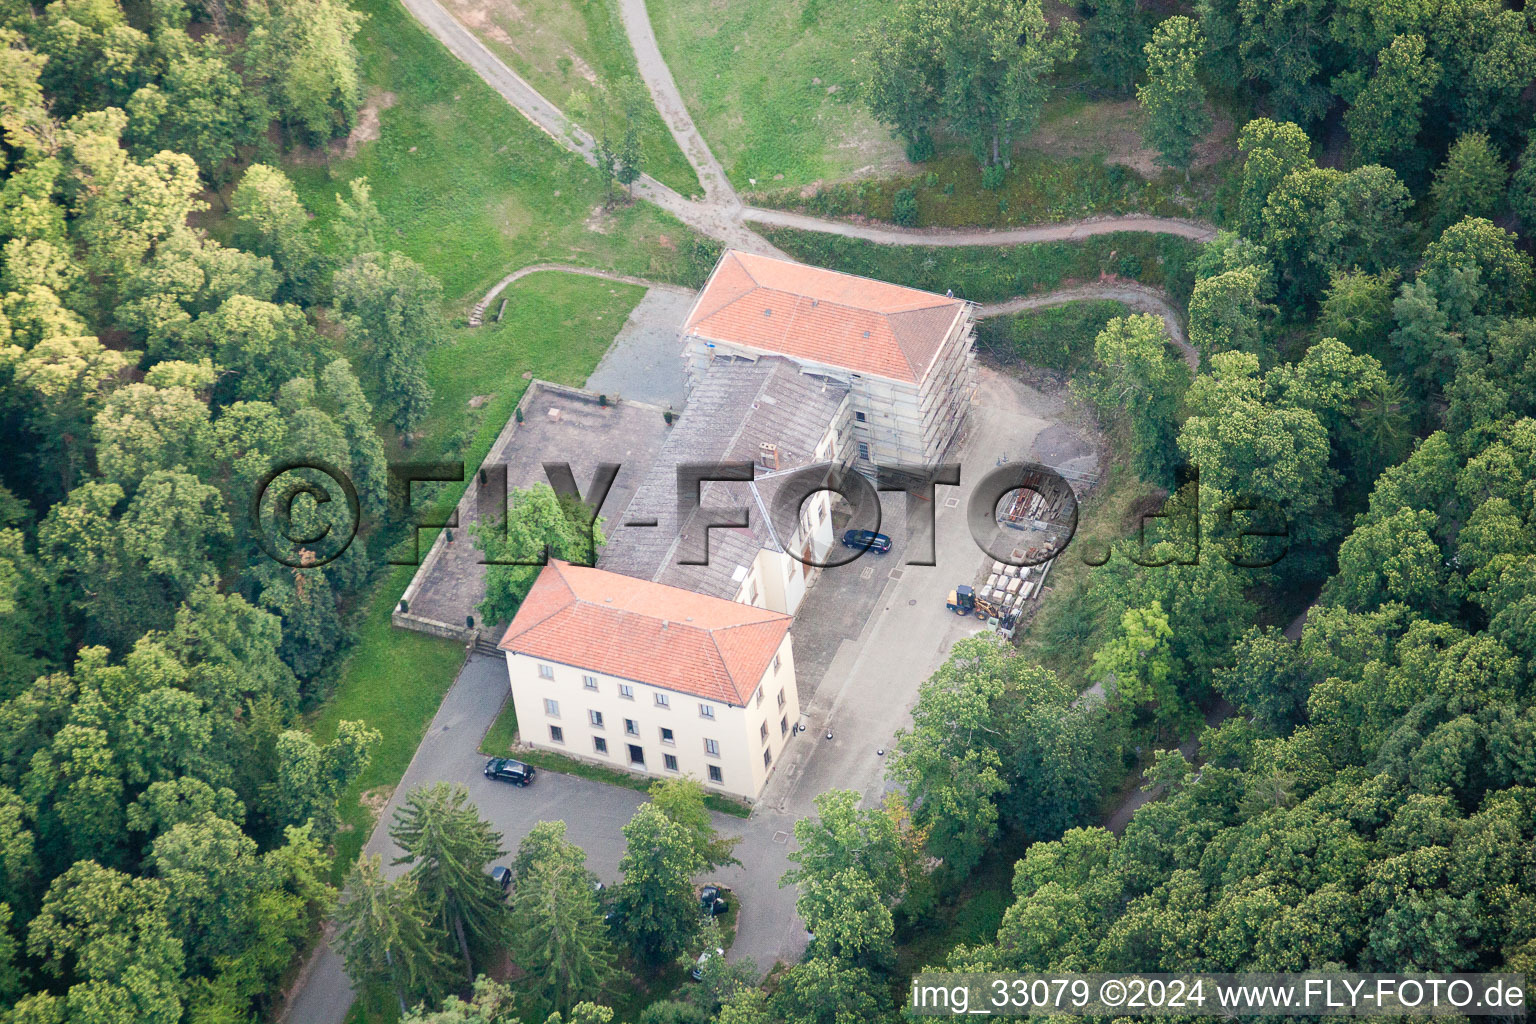 Palace Villa Ludwigshoehe in Edenkoben in the state Rhineland-Palatinate from above